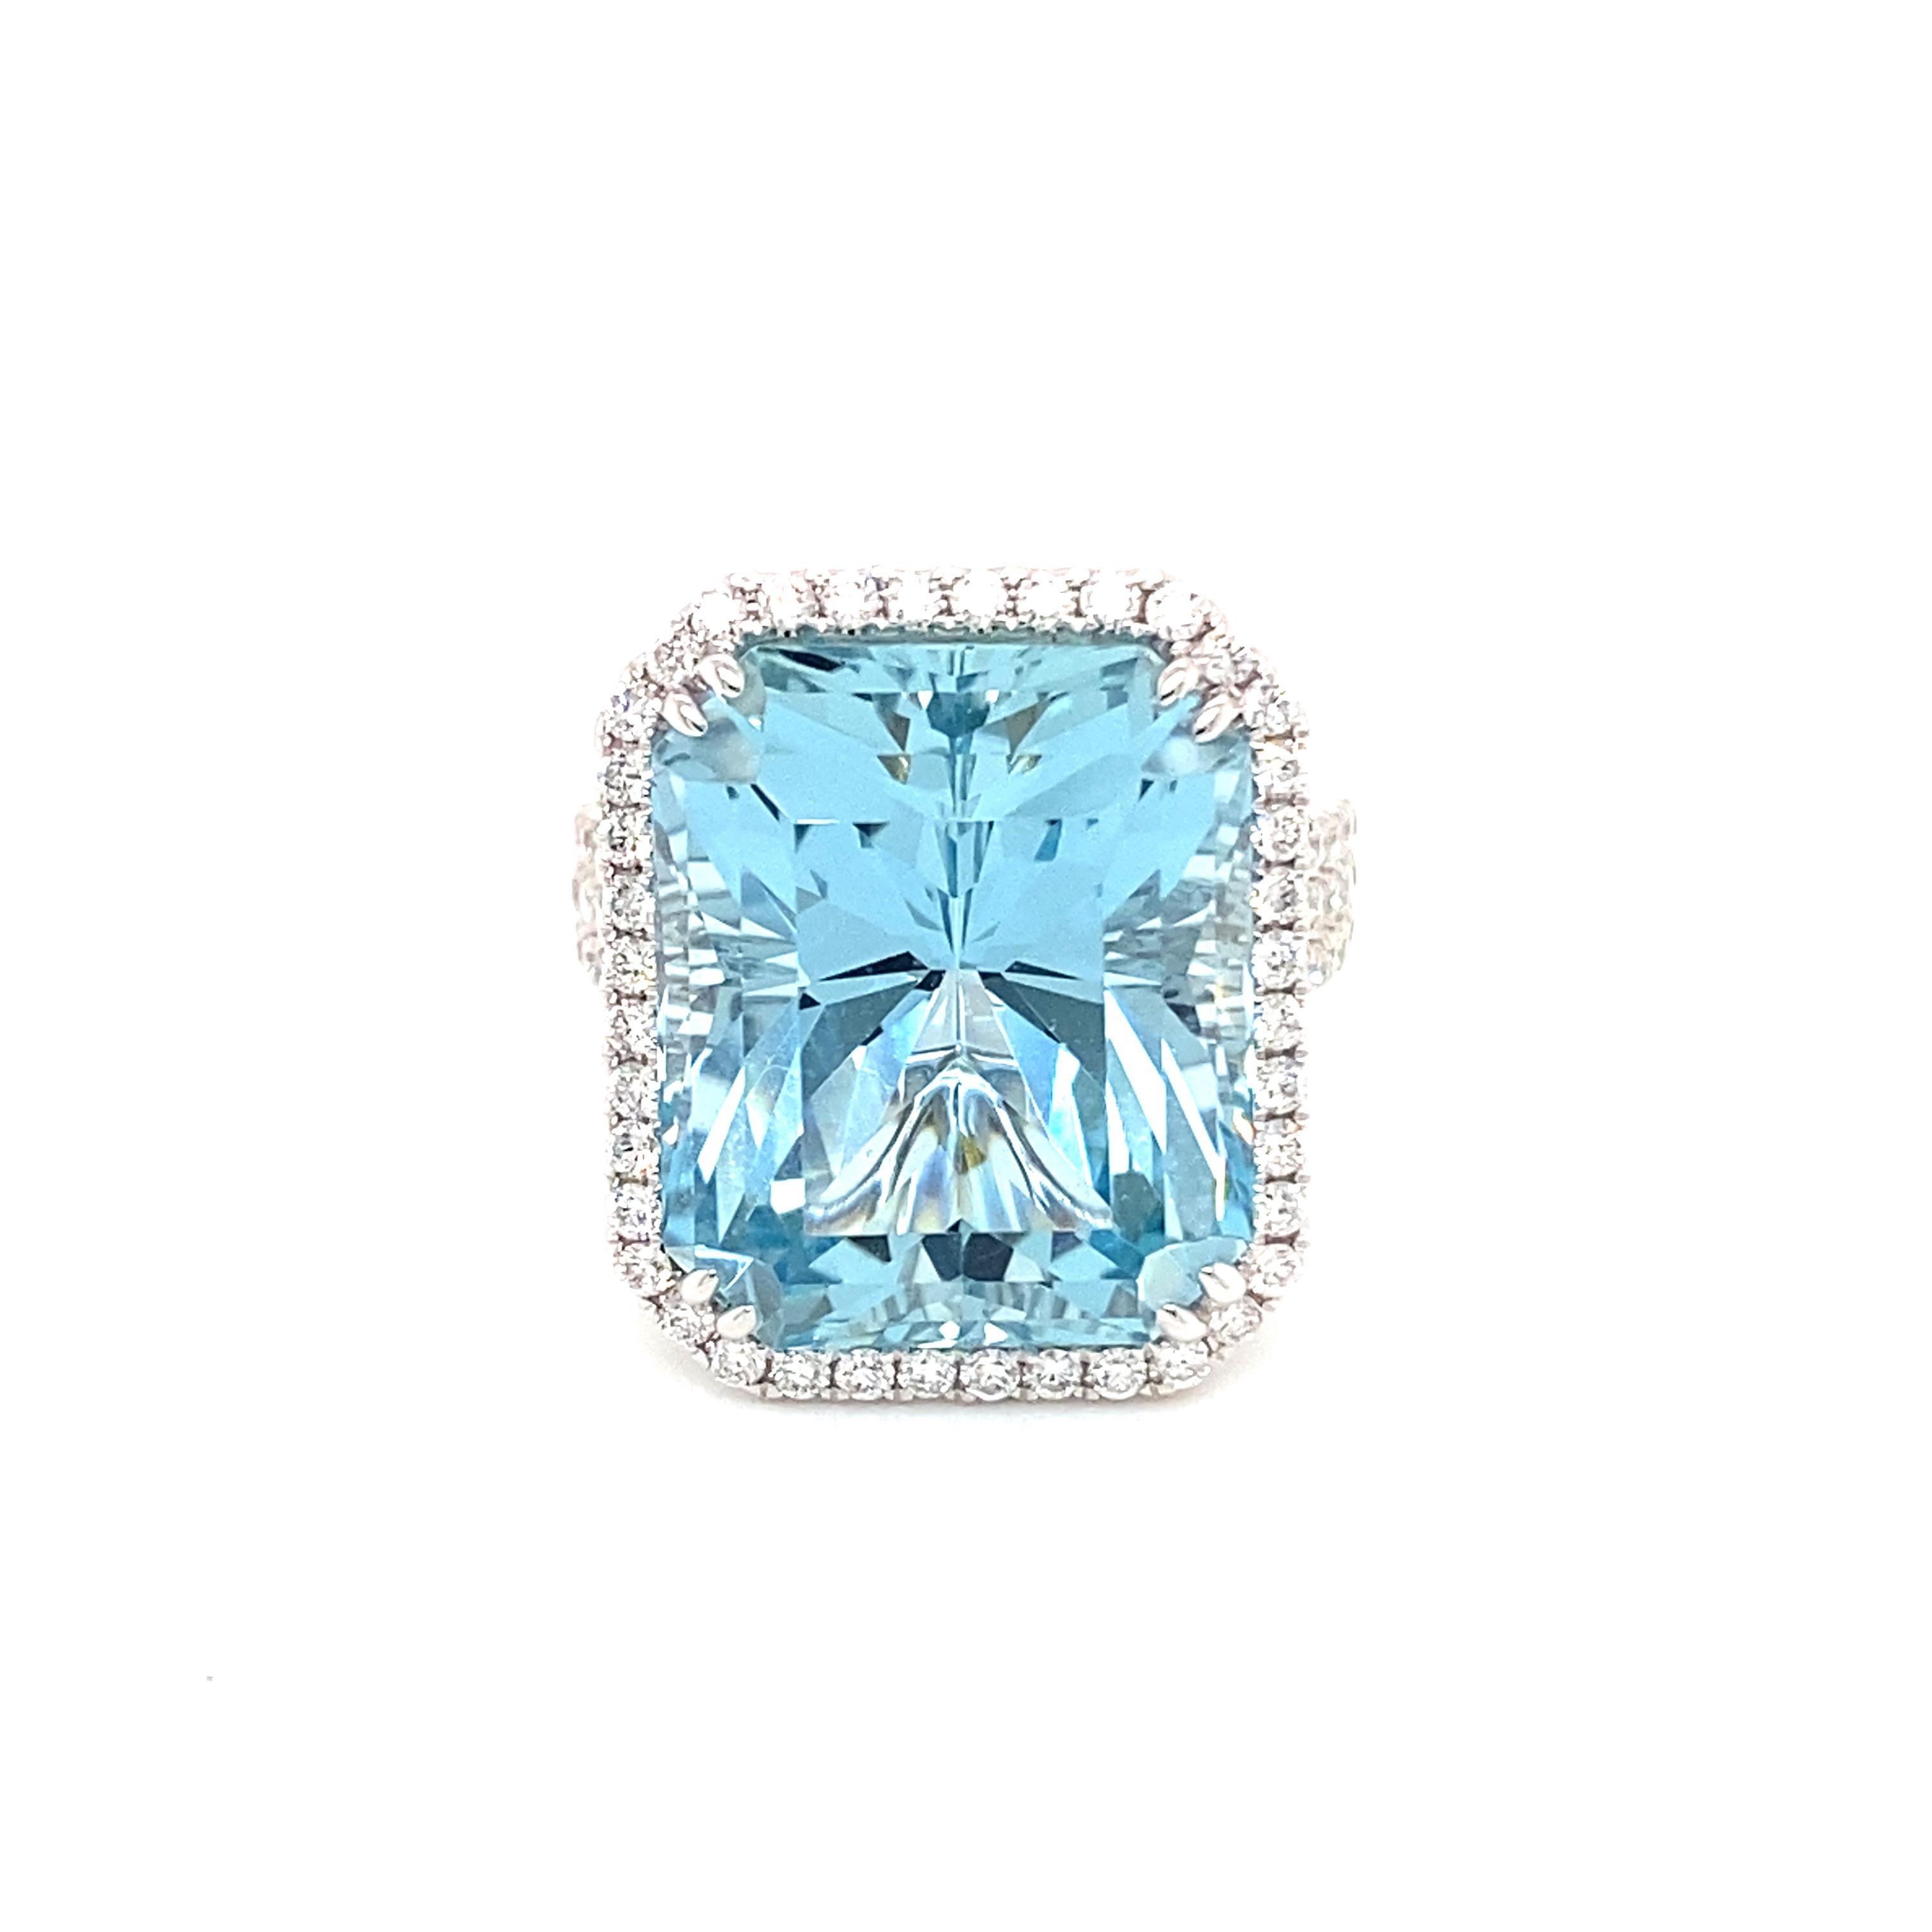 This stunning cocktail ring showcases a beautiful 16.79 Carat Emerald Cut Aquamarine with a Diamond Halo on a Triple Diamond Shank. 
This ring is set in 18k white gold.
Total Diamond Weight = 1.12 Carats. Ring Size is 6 1/2.